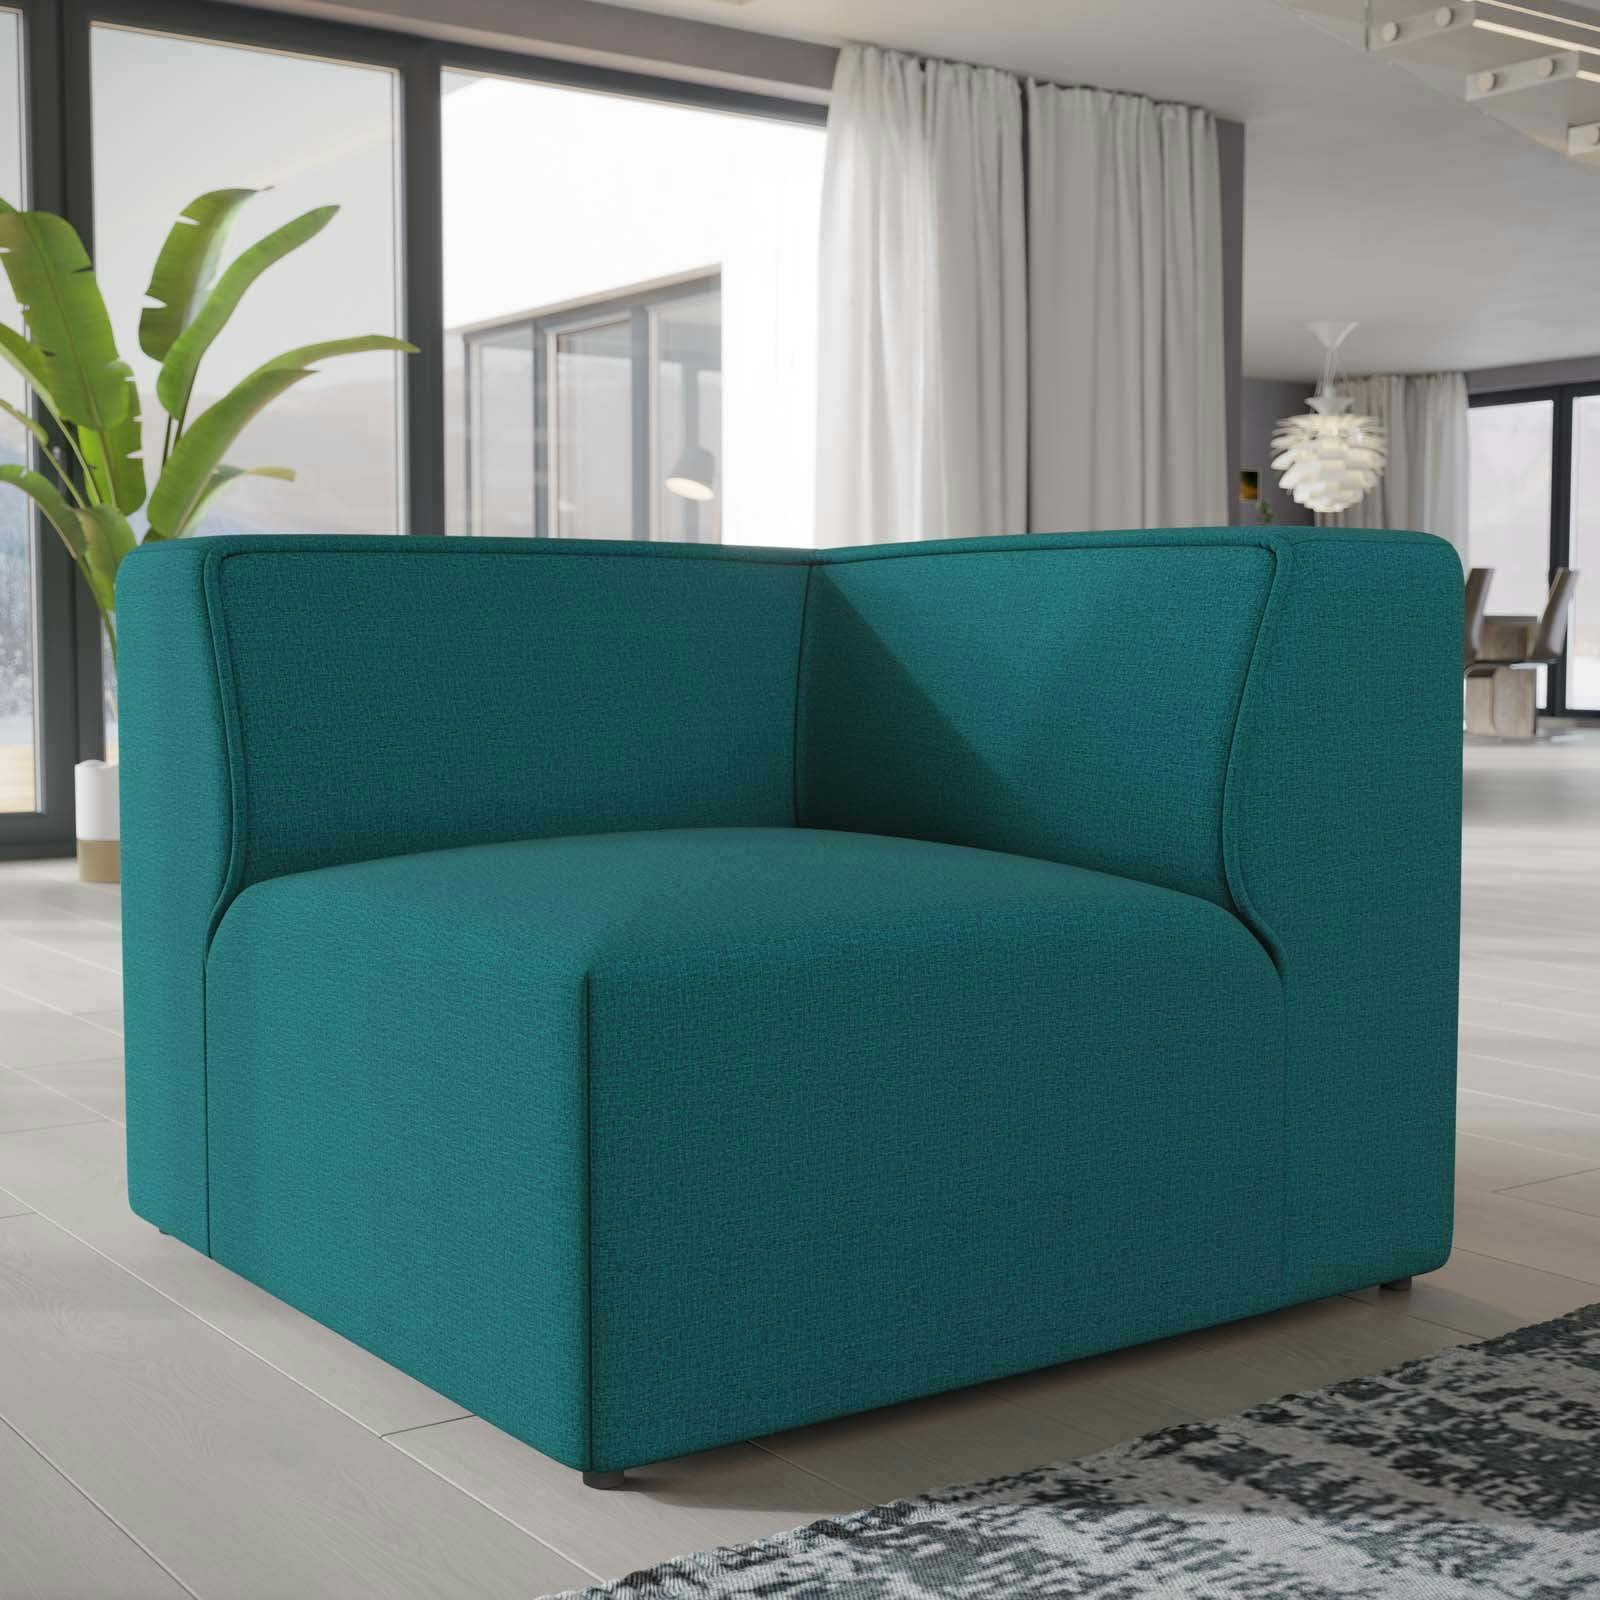 Modway Mingle Expansive Teal Corner Sofa with Elegant Piping